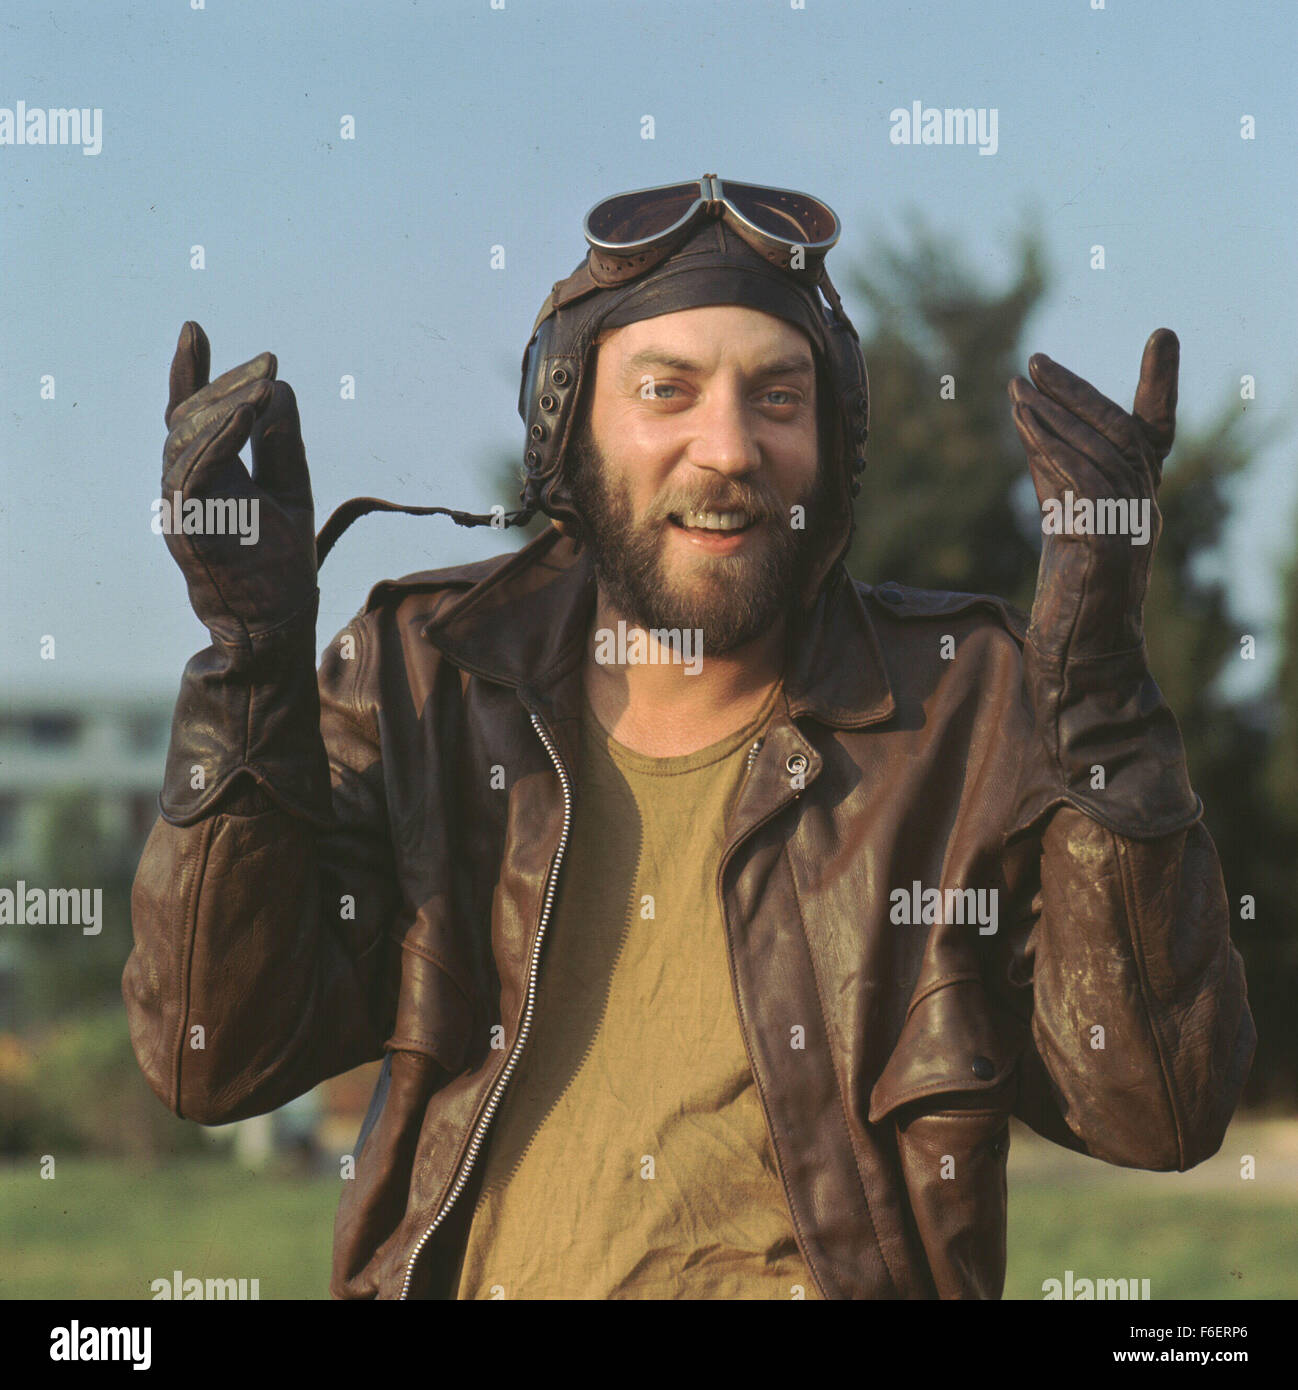 Jun 23, 1970; Hollywood, CA, USA; Actor DONALD SUTHERLAND stars as Capt. Oddball in the MGM war comedy, 'Kelly's Heroes.' Directed by Brian G. Hutton. Stock Photo